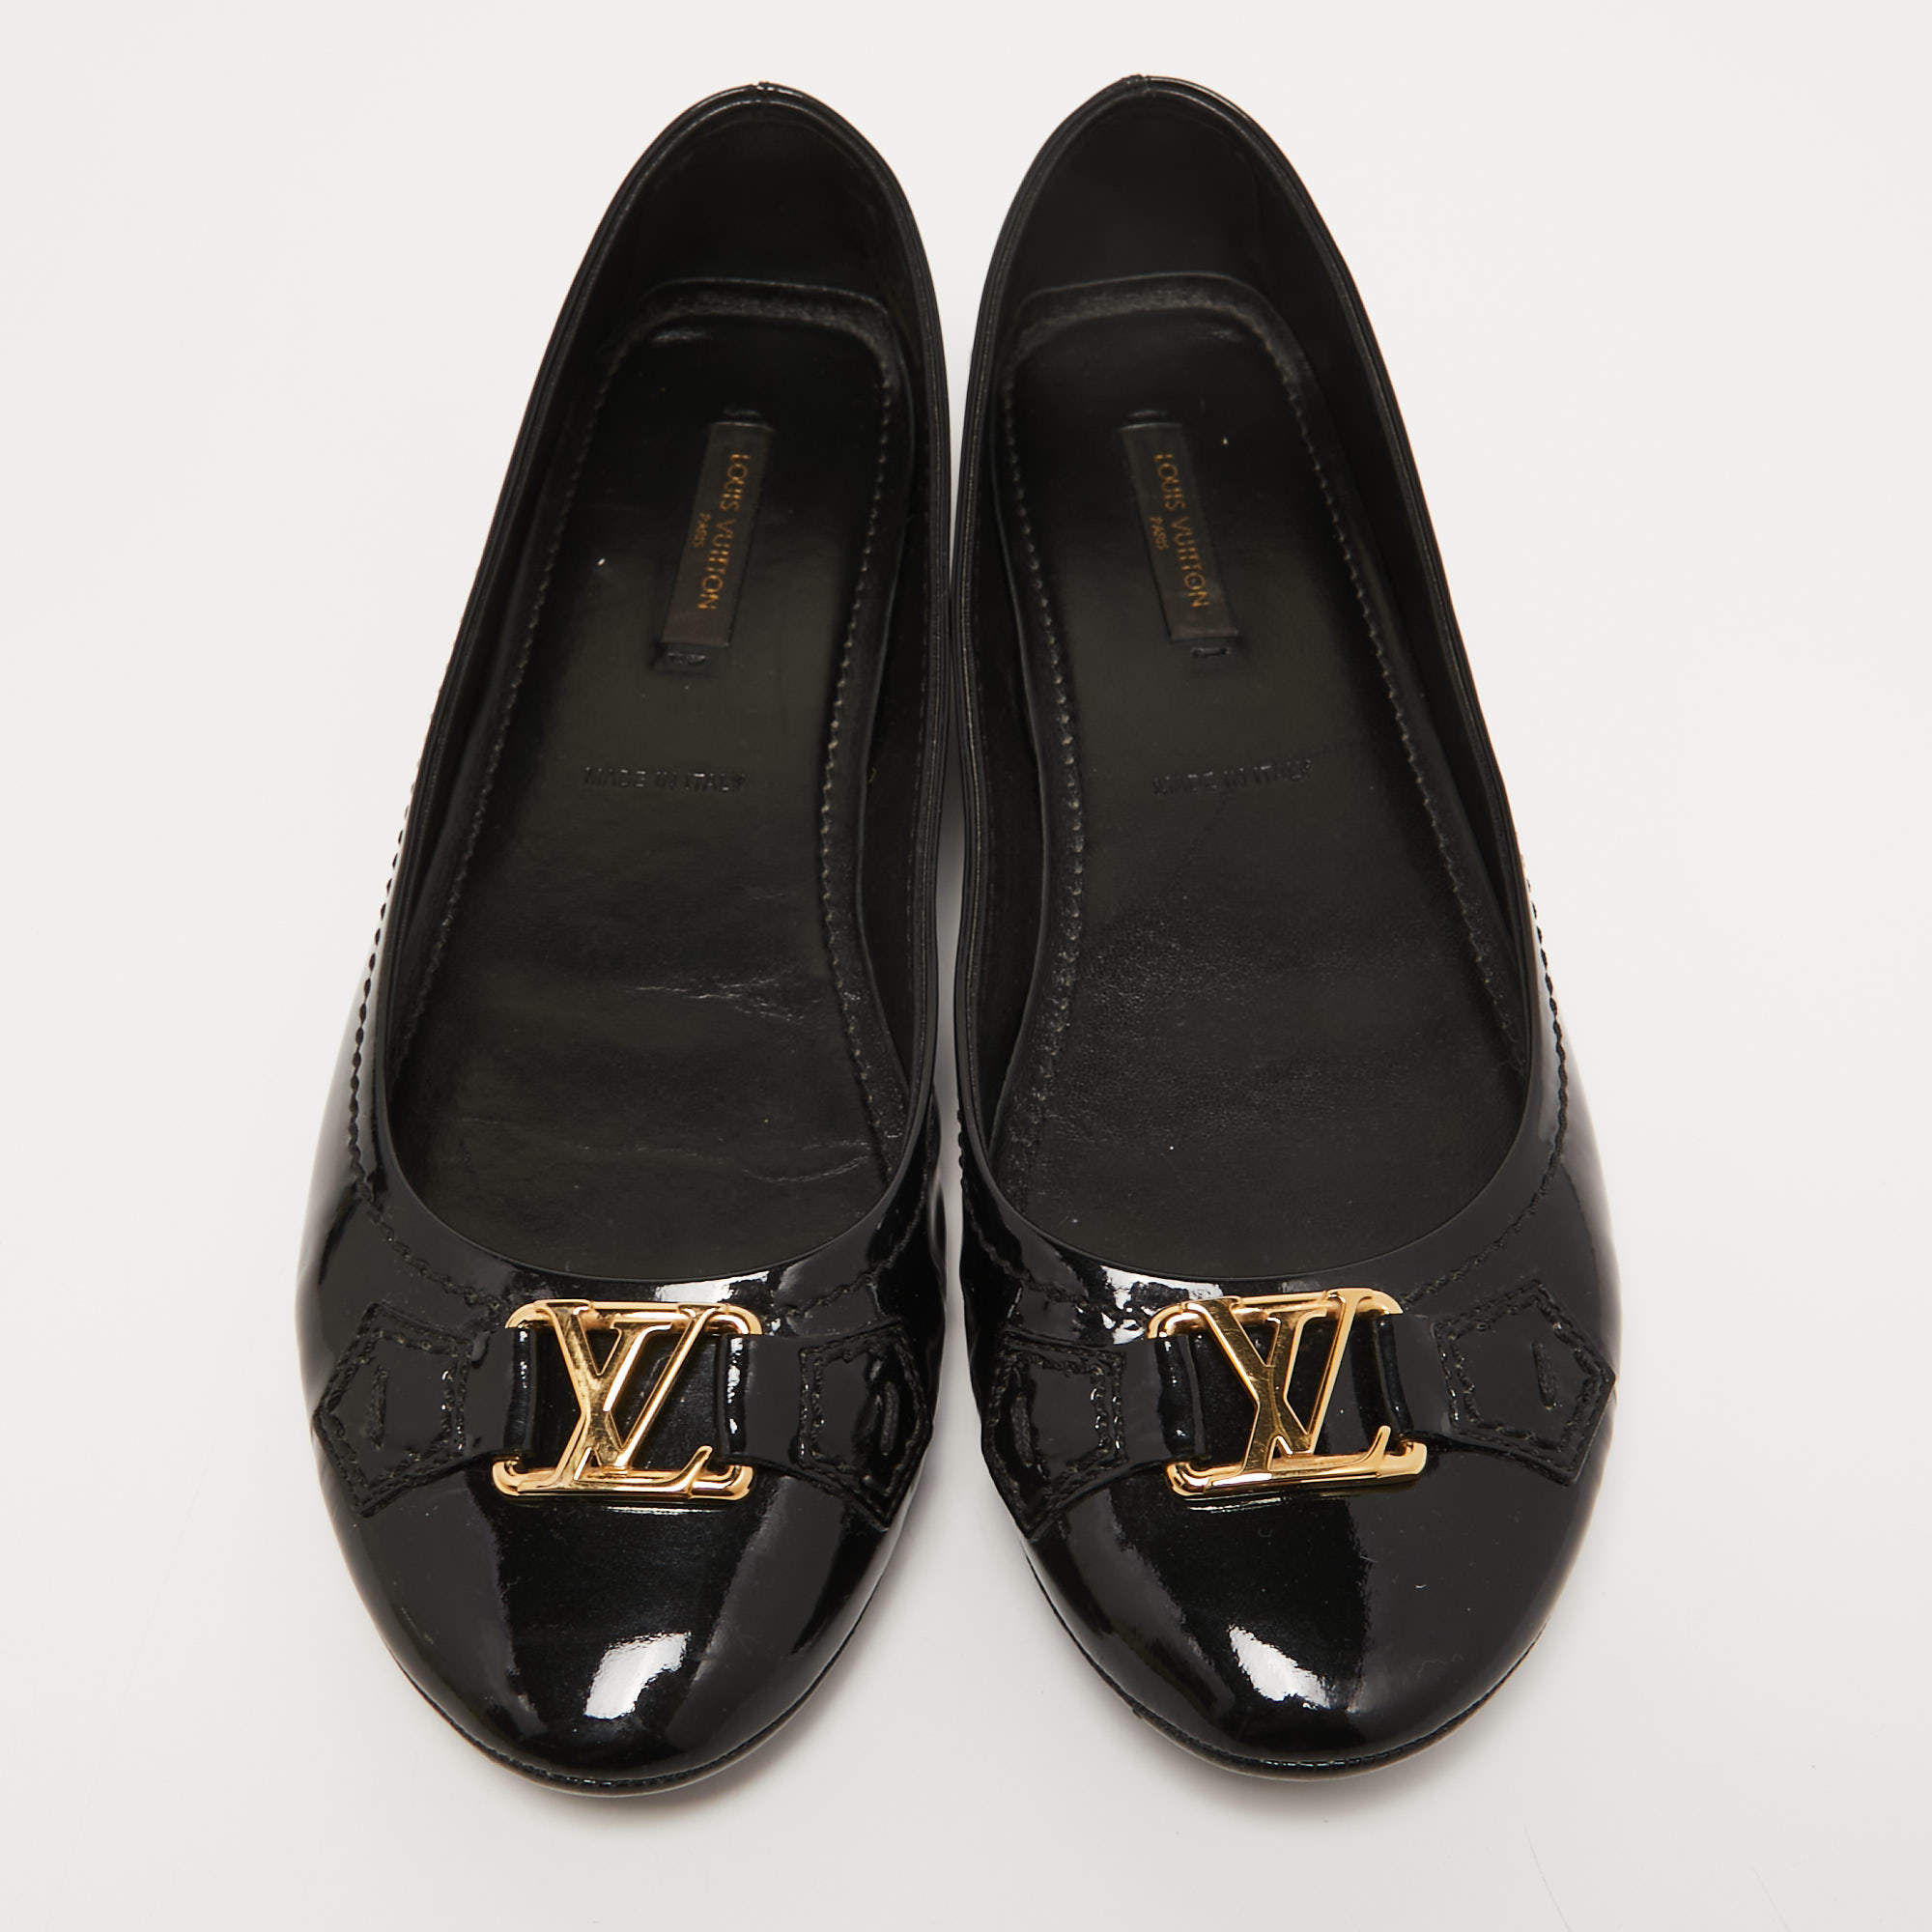 Louis Vuitton Black Patent Leather Oxford Flat Loafer Shoes Size 8 -  Yoogi's Closet